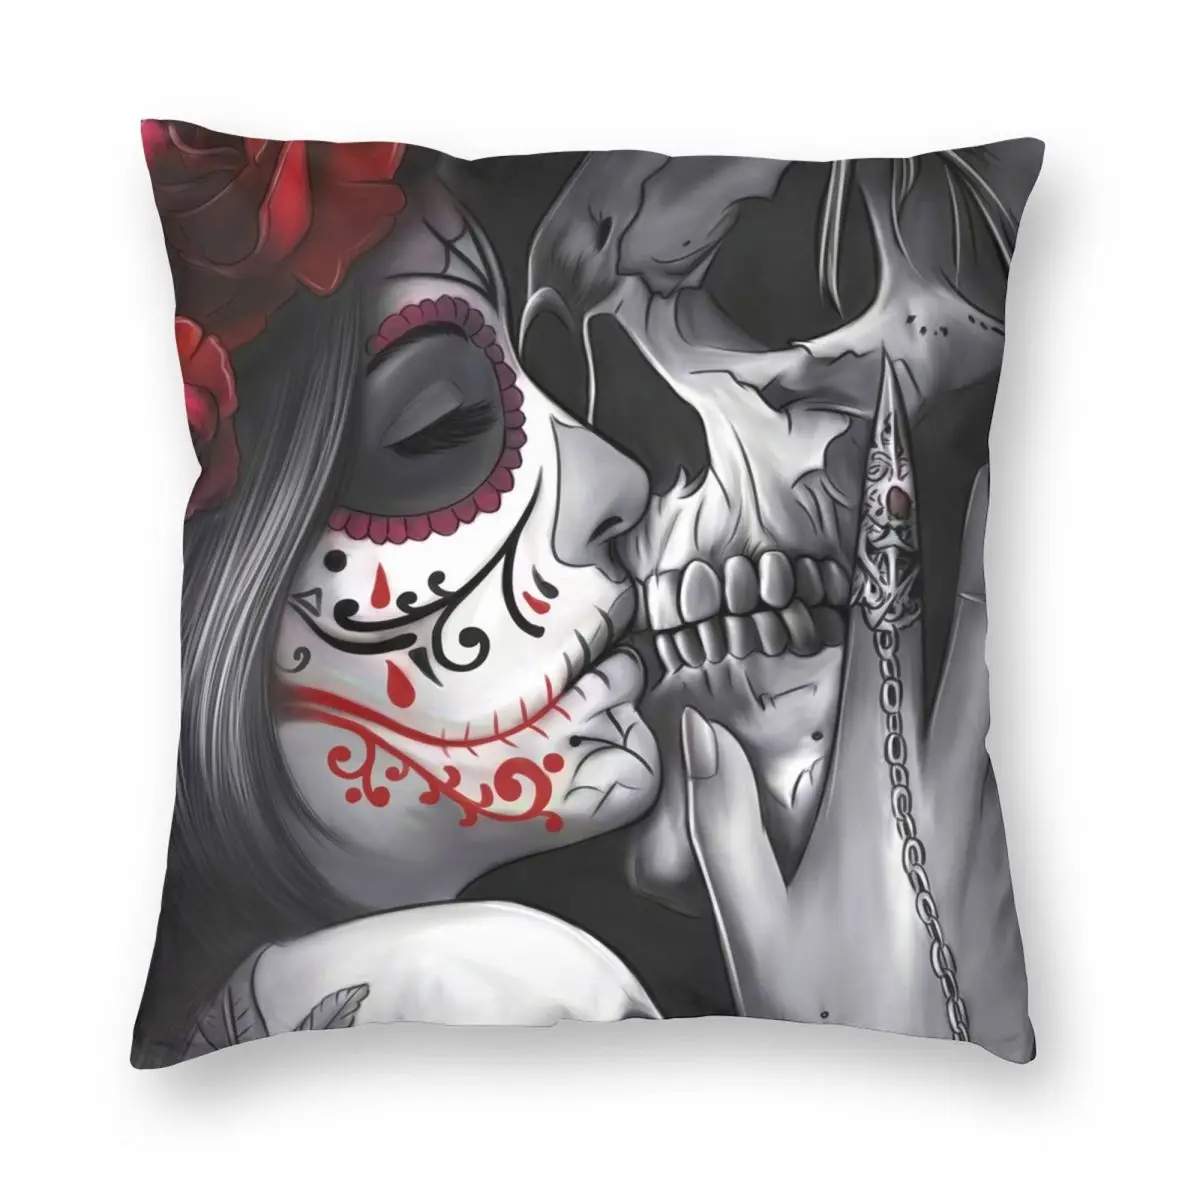 

Sugar Skull Pillowcase Soft Polyester Cushion Cover Decor Day of the Dead Throw Pillow Case Cover Home Wholesale 45X45cm